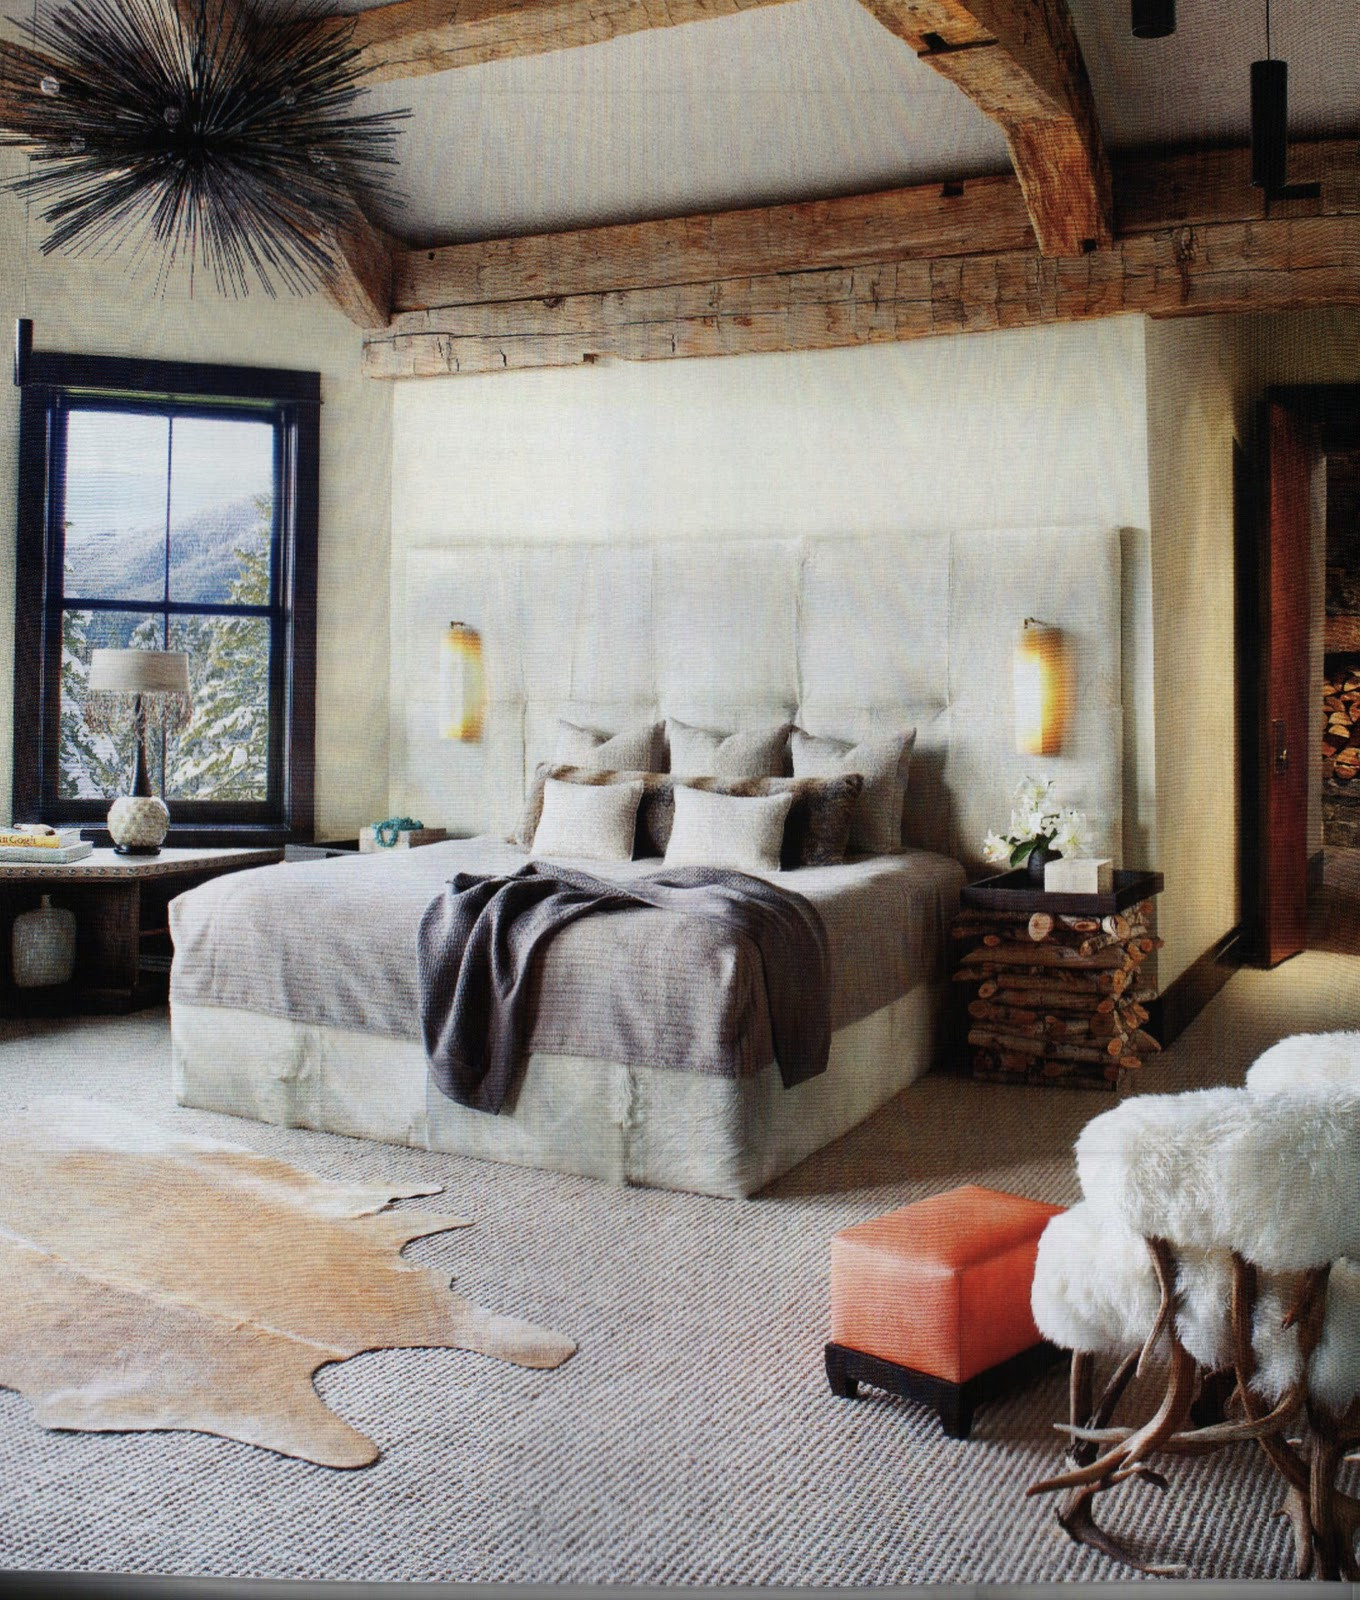 Rustic Glam Bedroom
 Luxe mix in a bedroom Rustic Glam